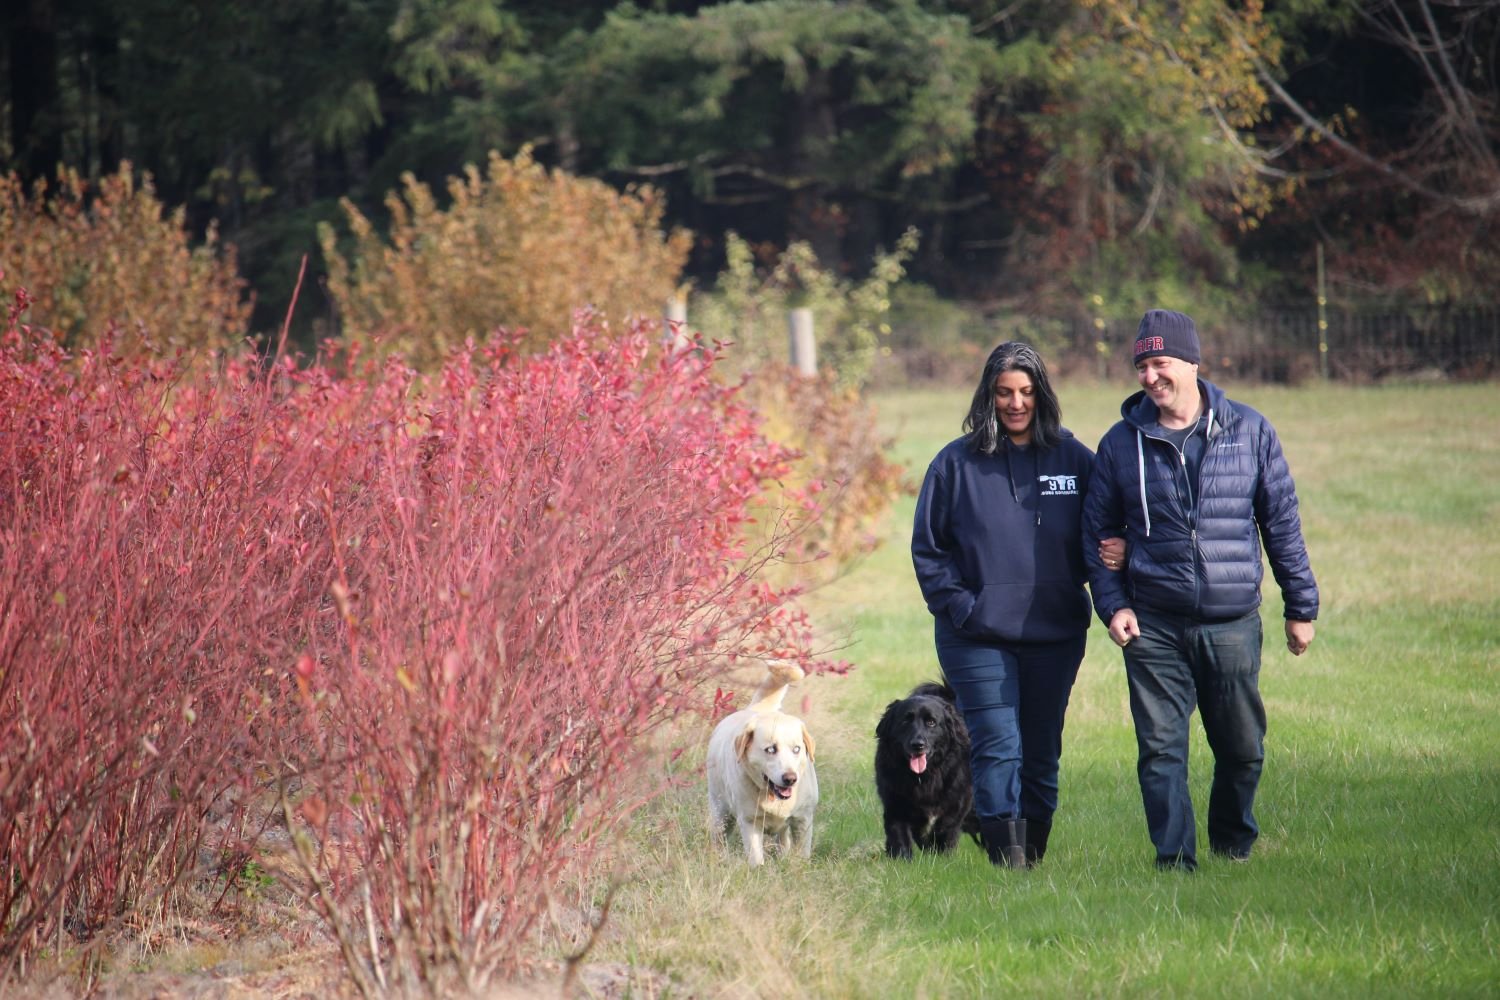 A dark-haired woman wearing a blue hoodie and jeans walks arm in arm with a man in a blue toque and puffy jacket through a field. Beside them walk two mid-sized dogs, one white and one black.